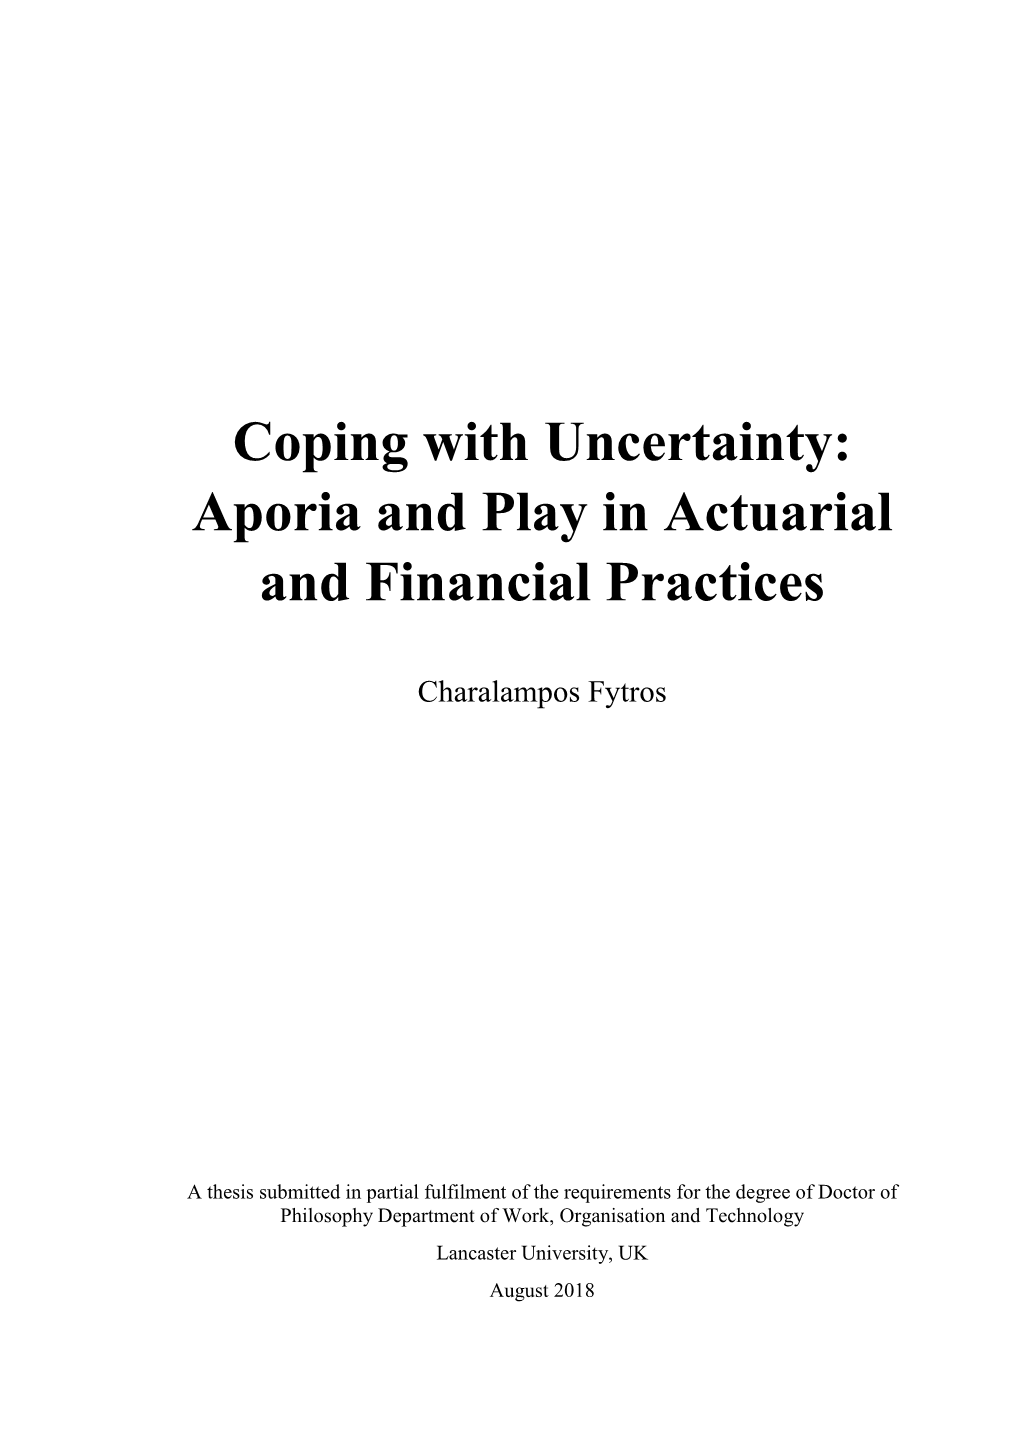 Entanglements, Aporia and Play in Financial and Actuarial Practices